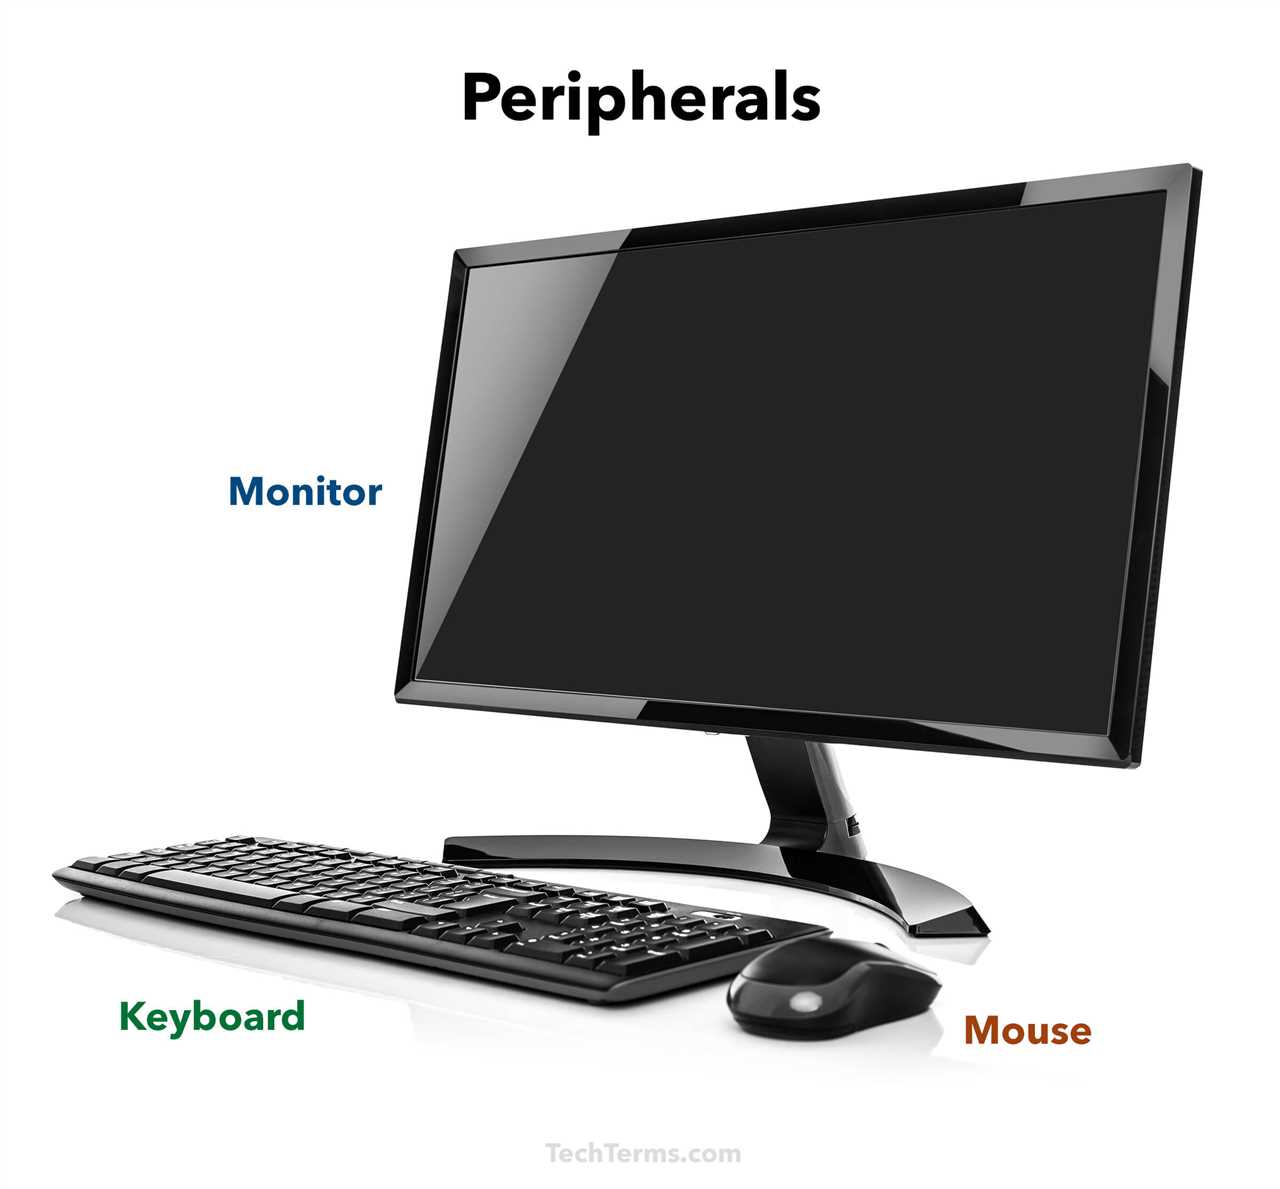 Section 3: Functions and Uses of Peripheral Devices